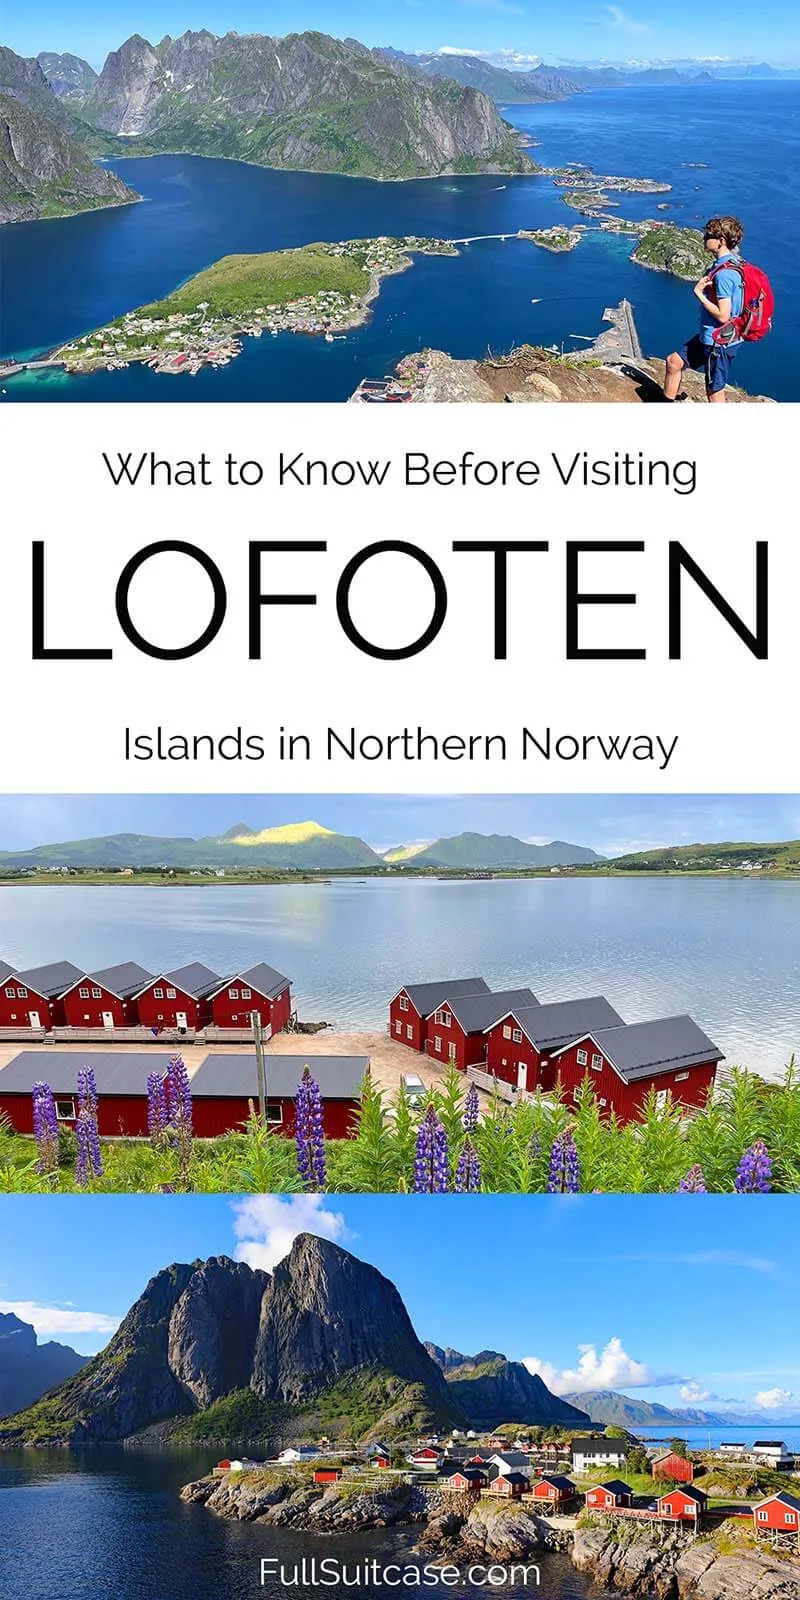 Things to know before visiting Lofoten islands in Norway